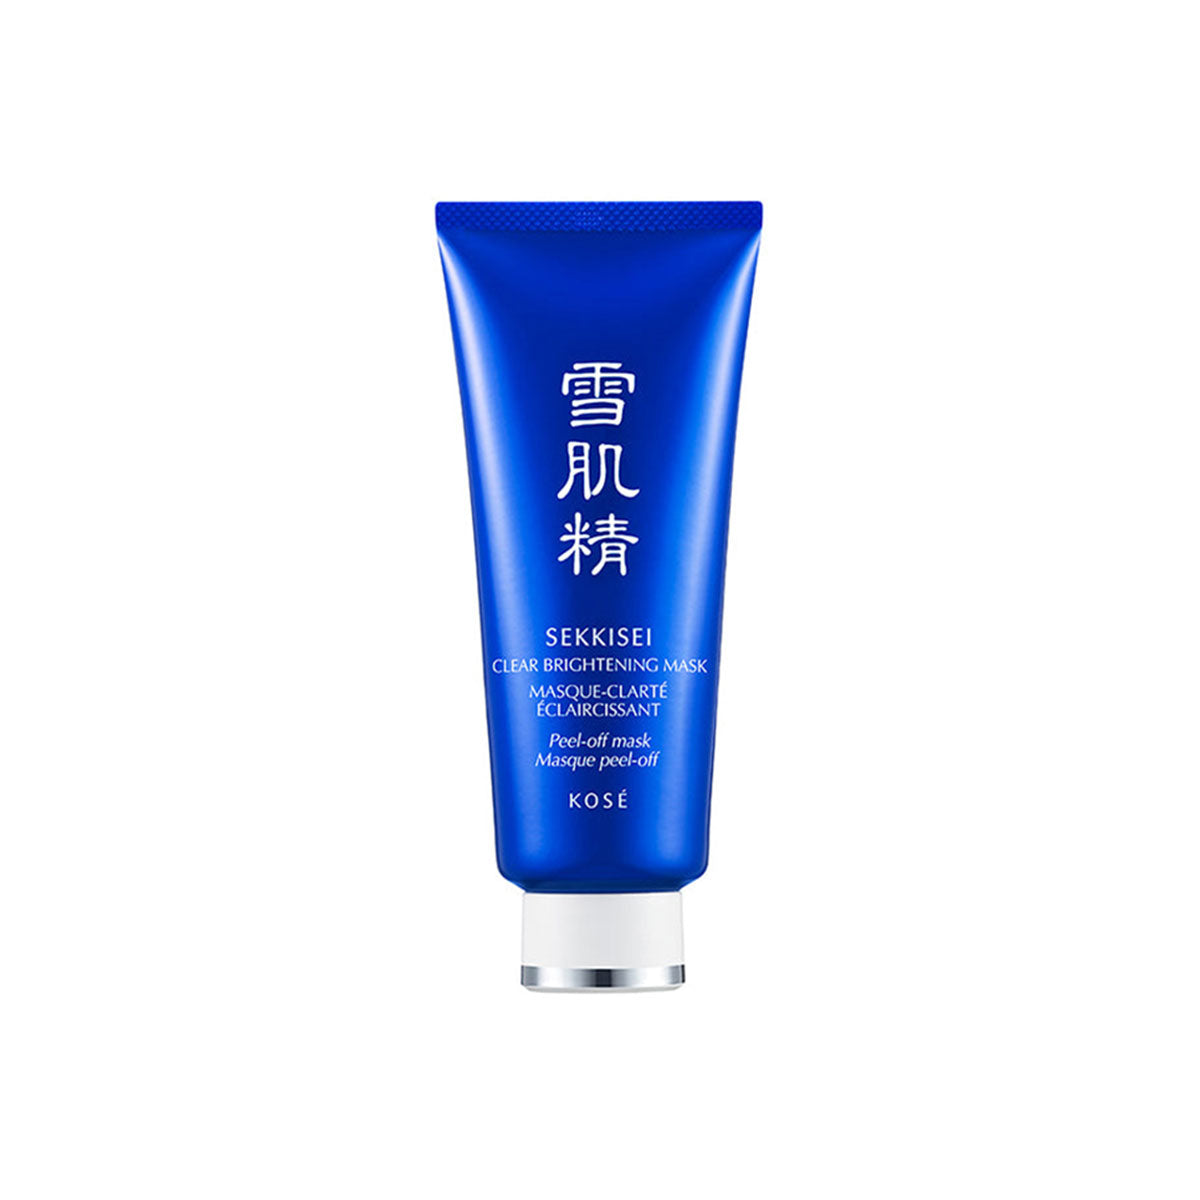 Clear Brightening Mask For Blackhead And Dull Skin 75ml